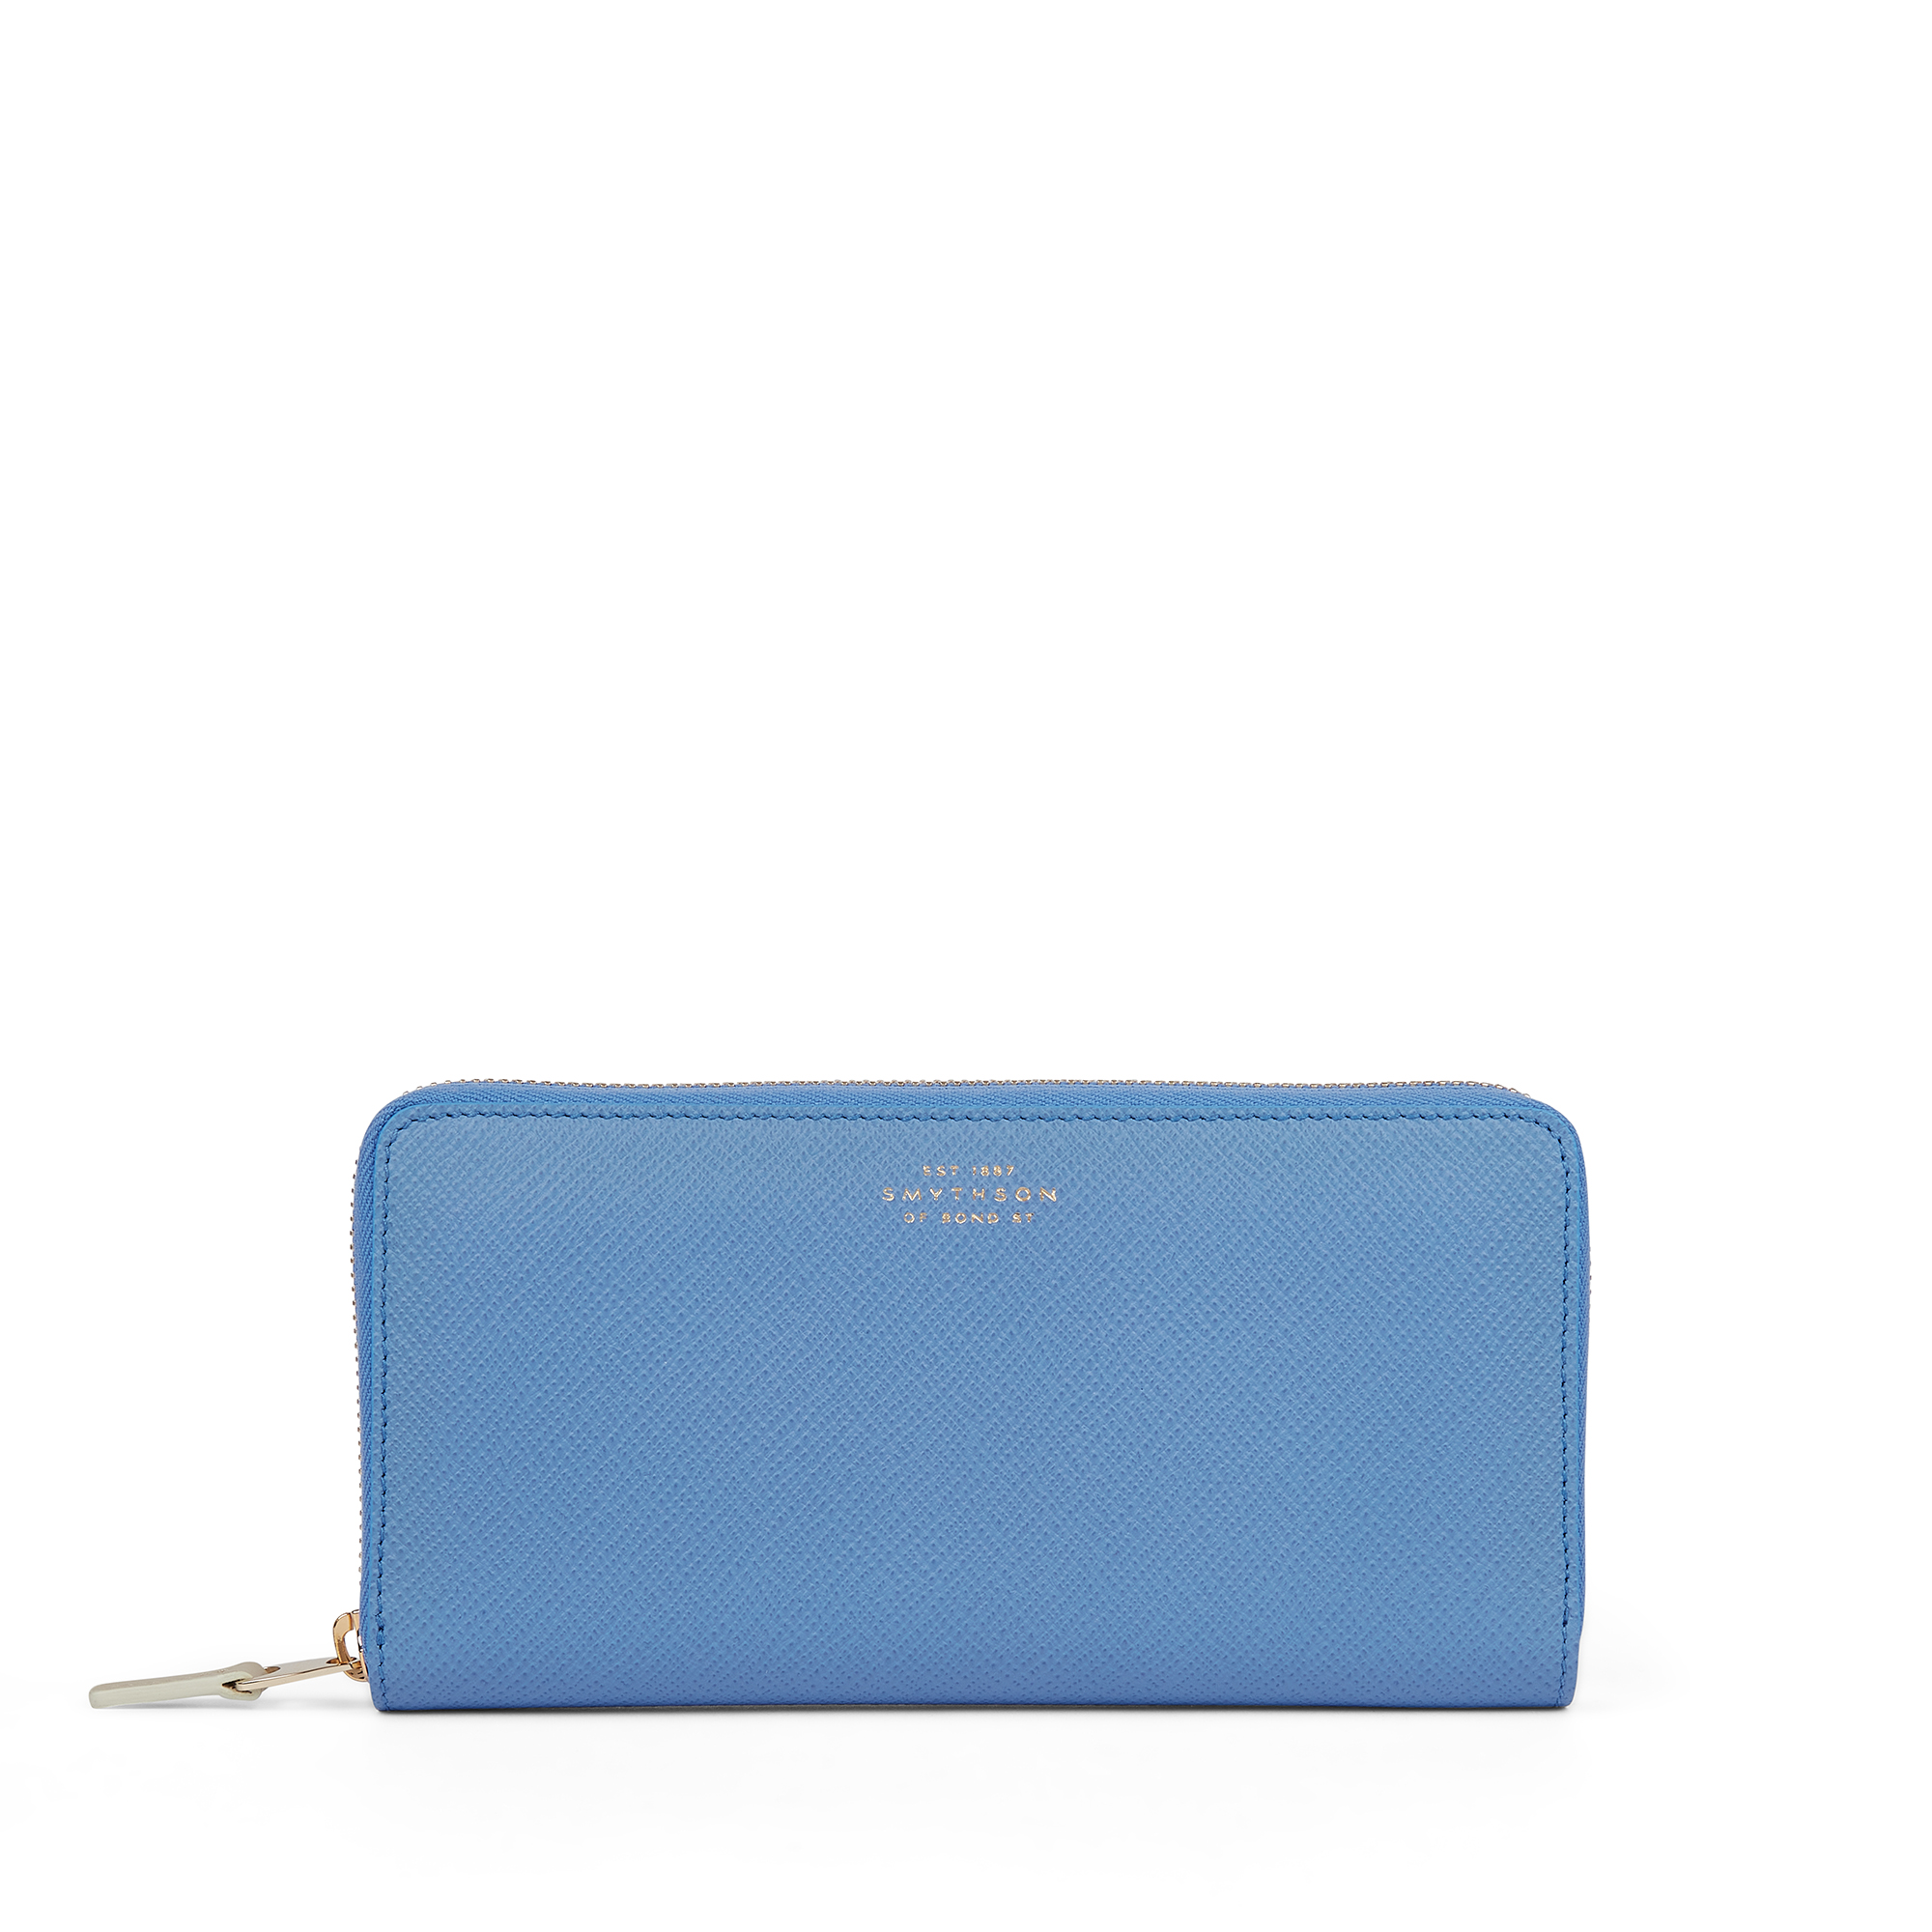 Smythson Large Zip Around Purse In Panama In Nile Blue